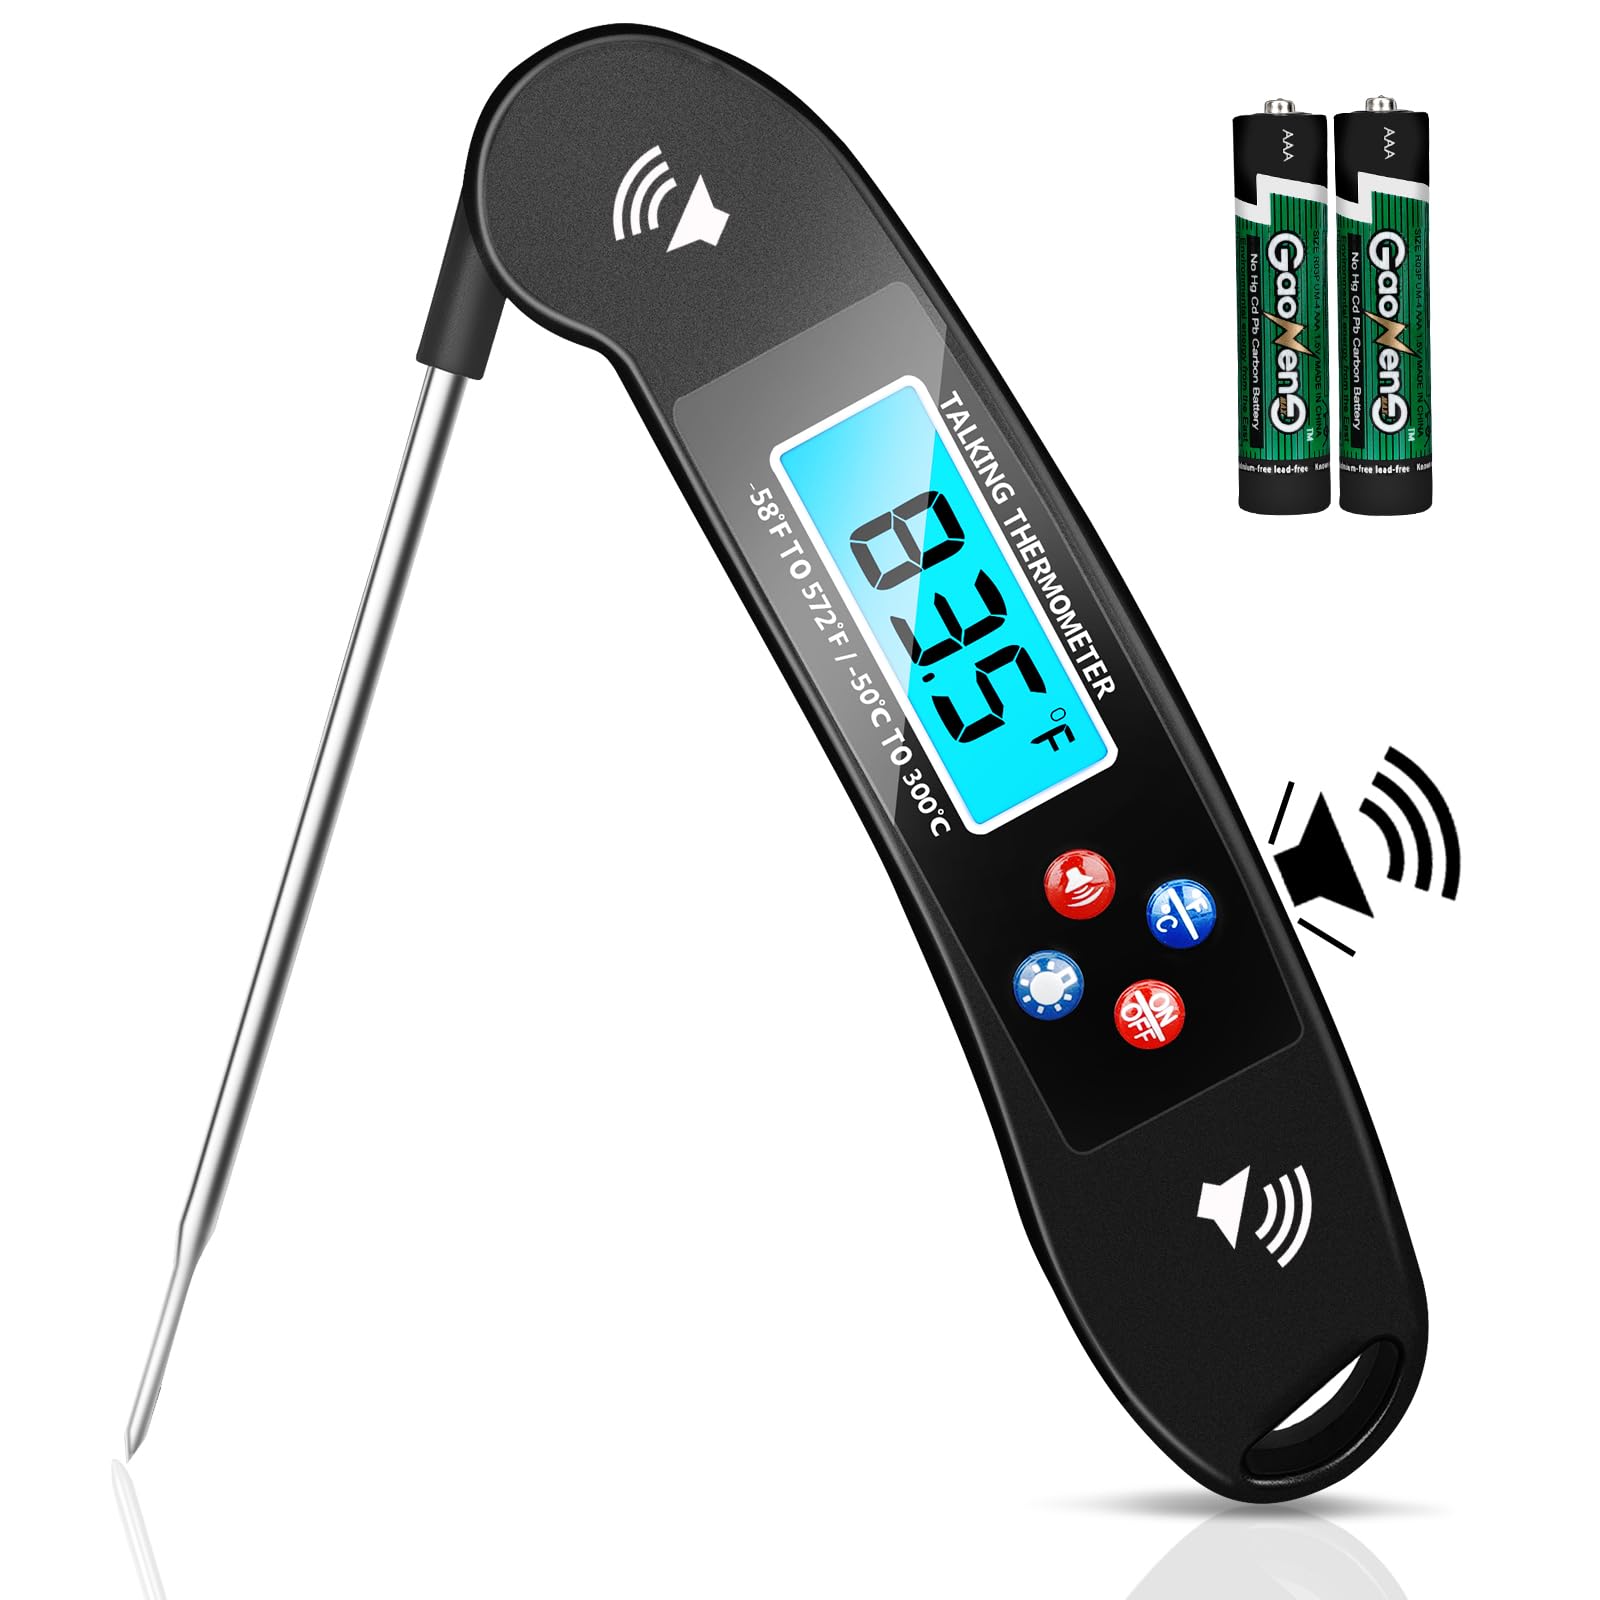 waiymi Digital Talking Thermometer for The Blind, Waterproof Instant Read Food Thermometer with Talking Function & Backlight, Meat Thermometer with Probe for Cooking and Grilling, and More